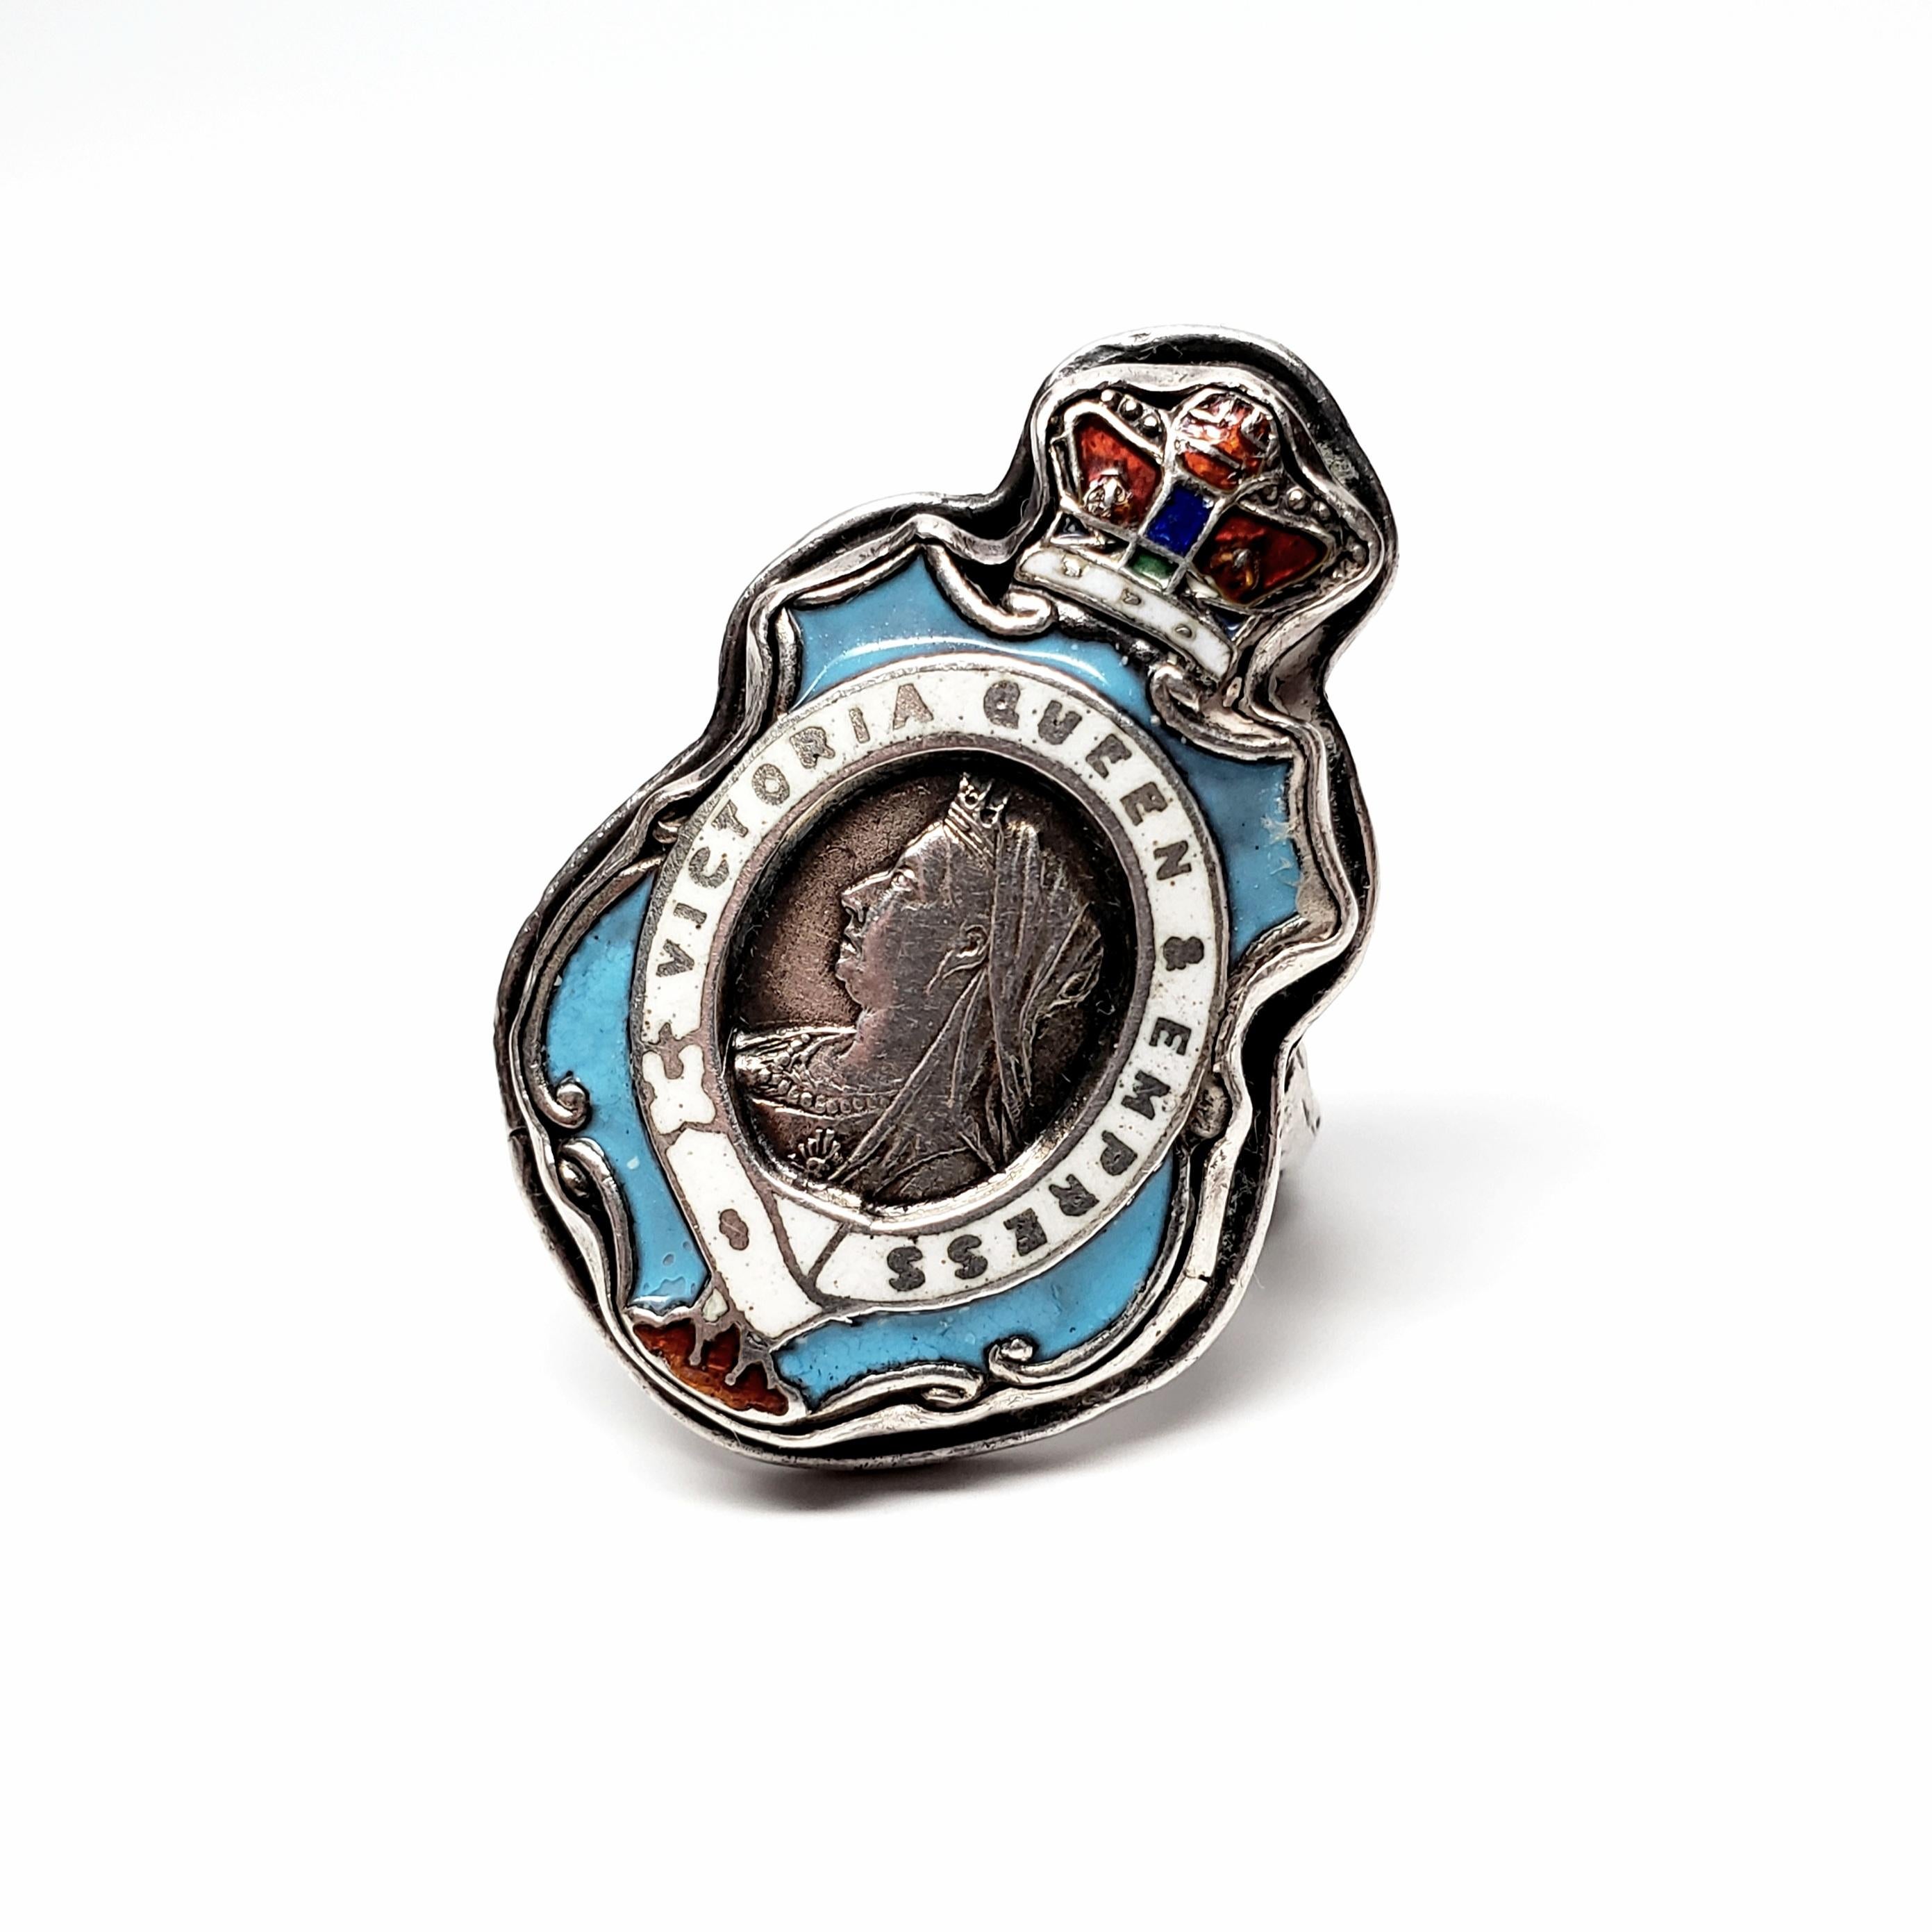 Sterling silver and enamel Queen Victoria Empress Badge ring.

Size 5 3/4

Badge shaped ring with detailed red enamel crown, blue and white enamel accents, 